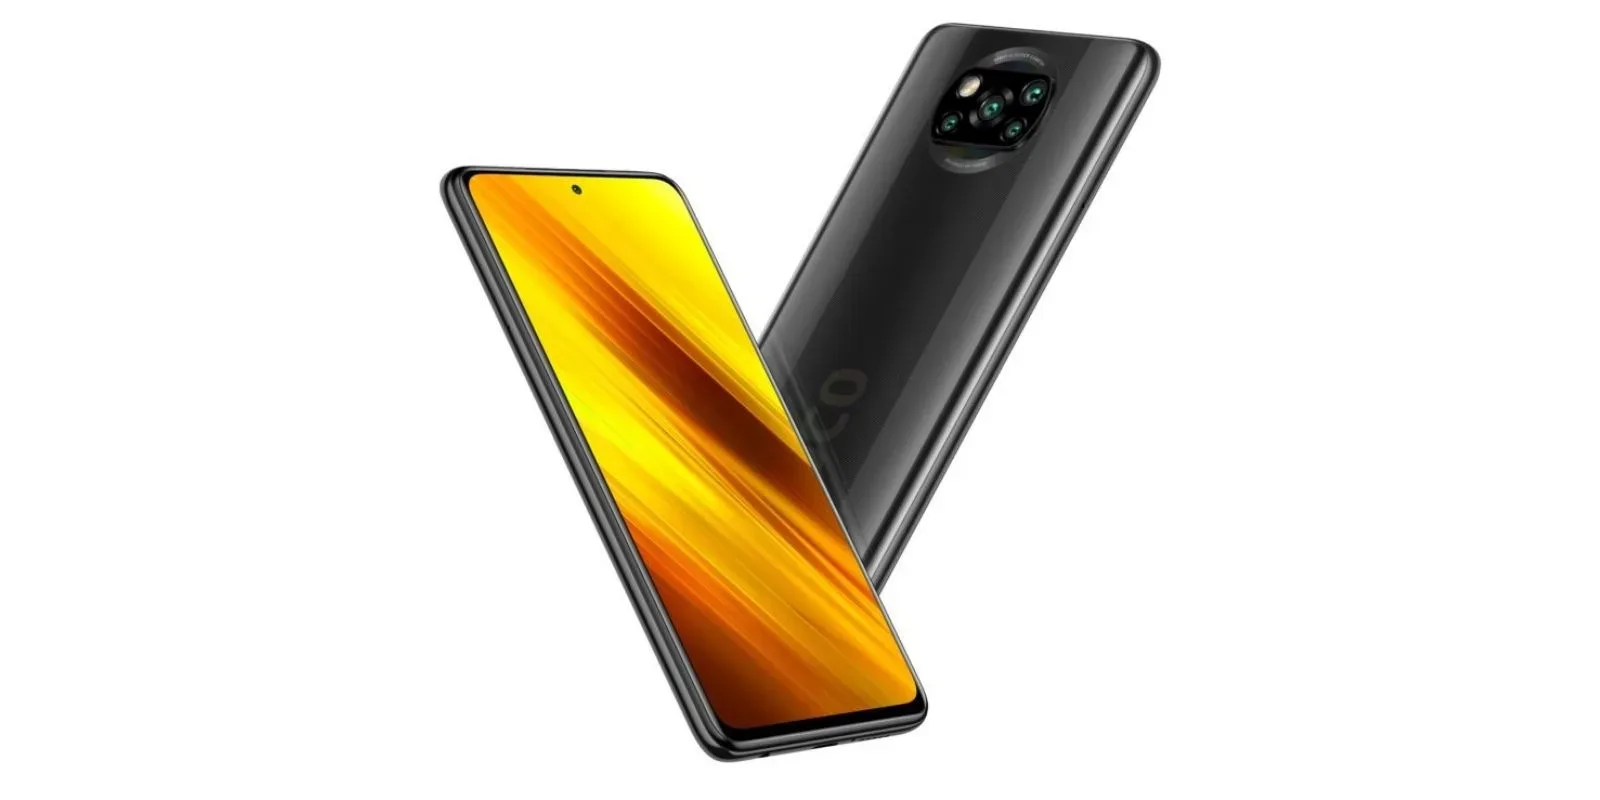 Poco X3 Launched In India With A 120Hz Display, 6,000Mah Battery, And Snapdragon 732G